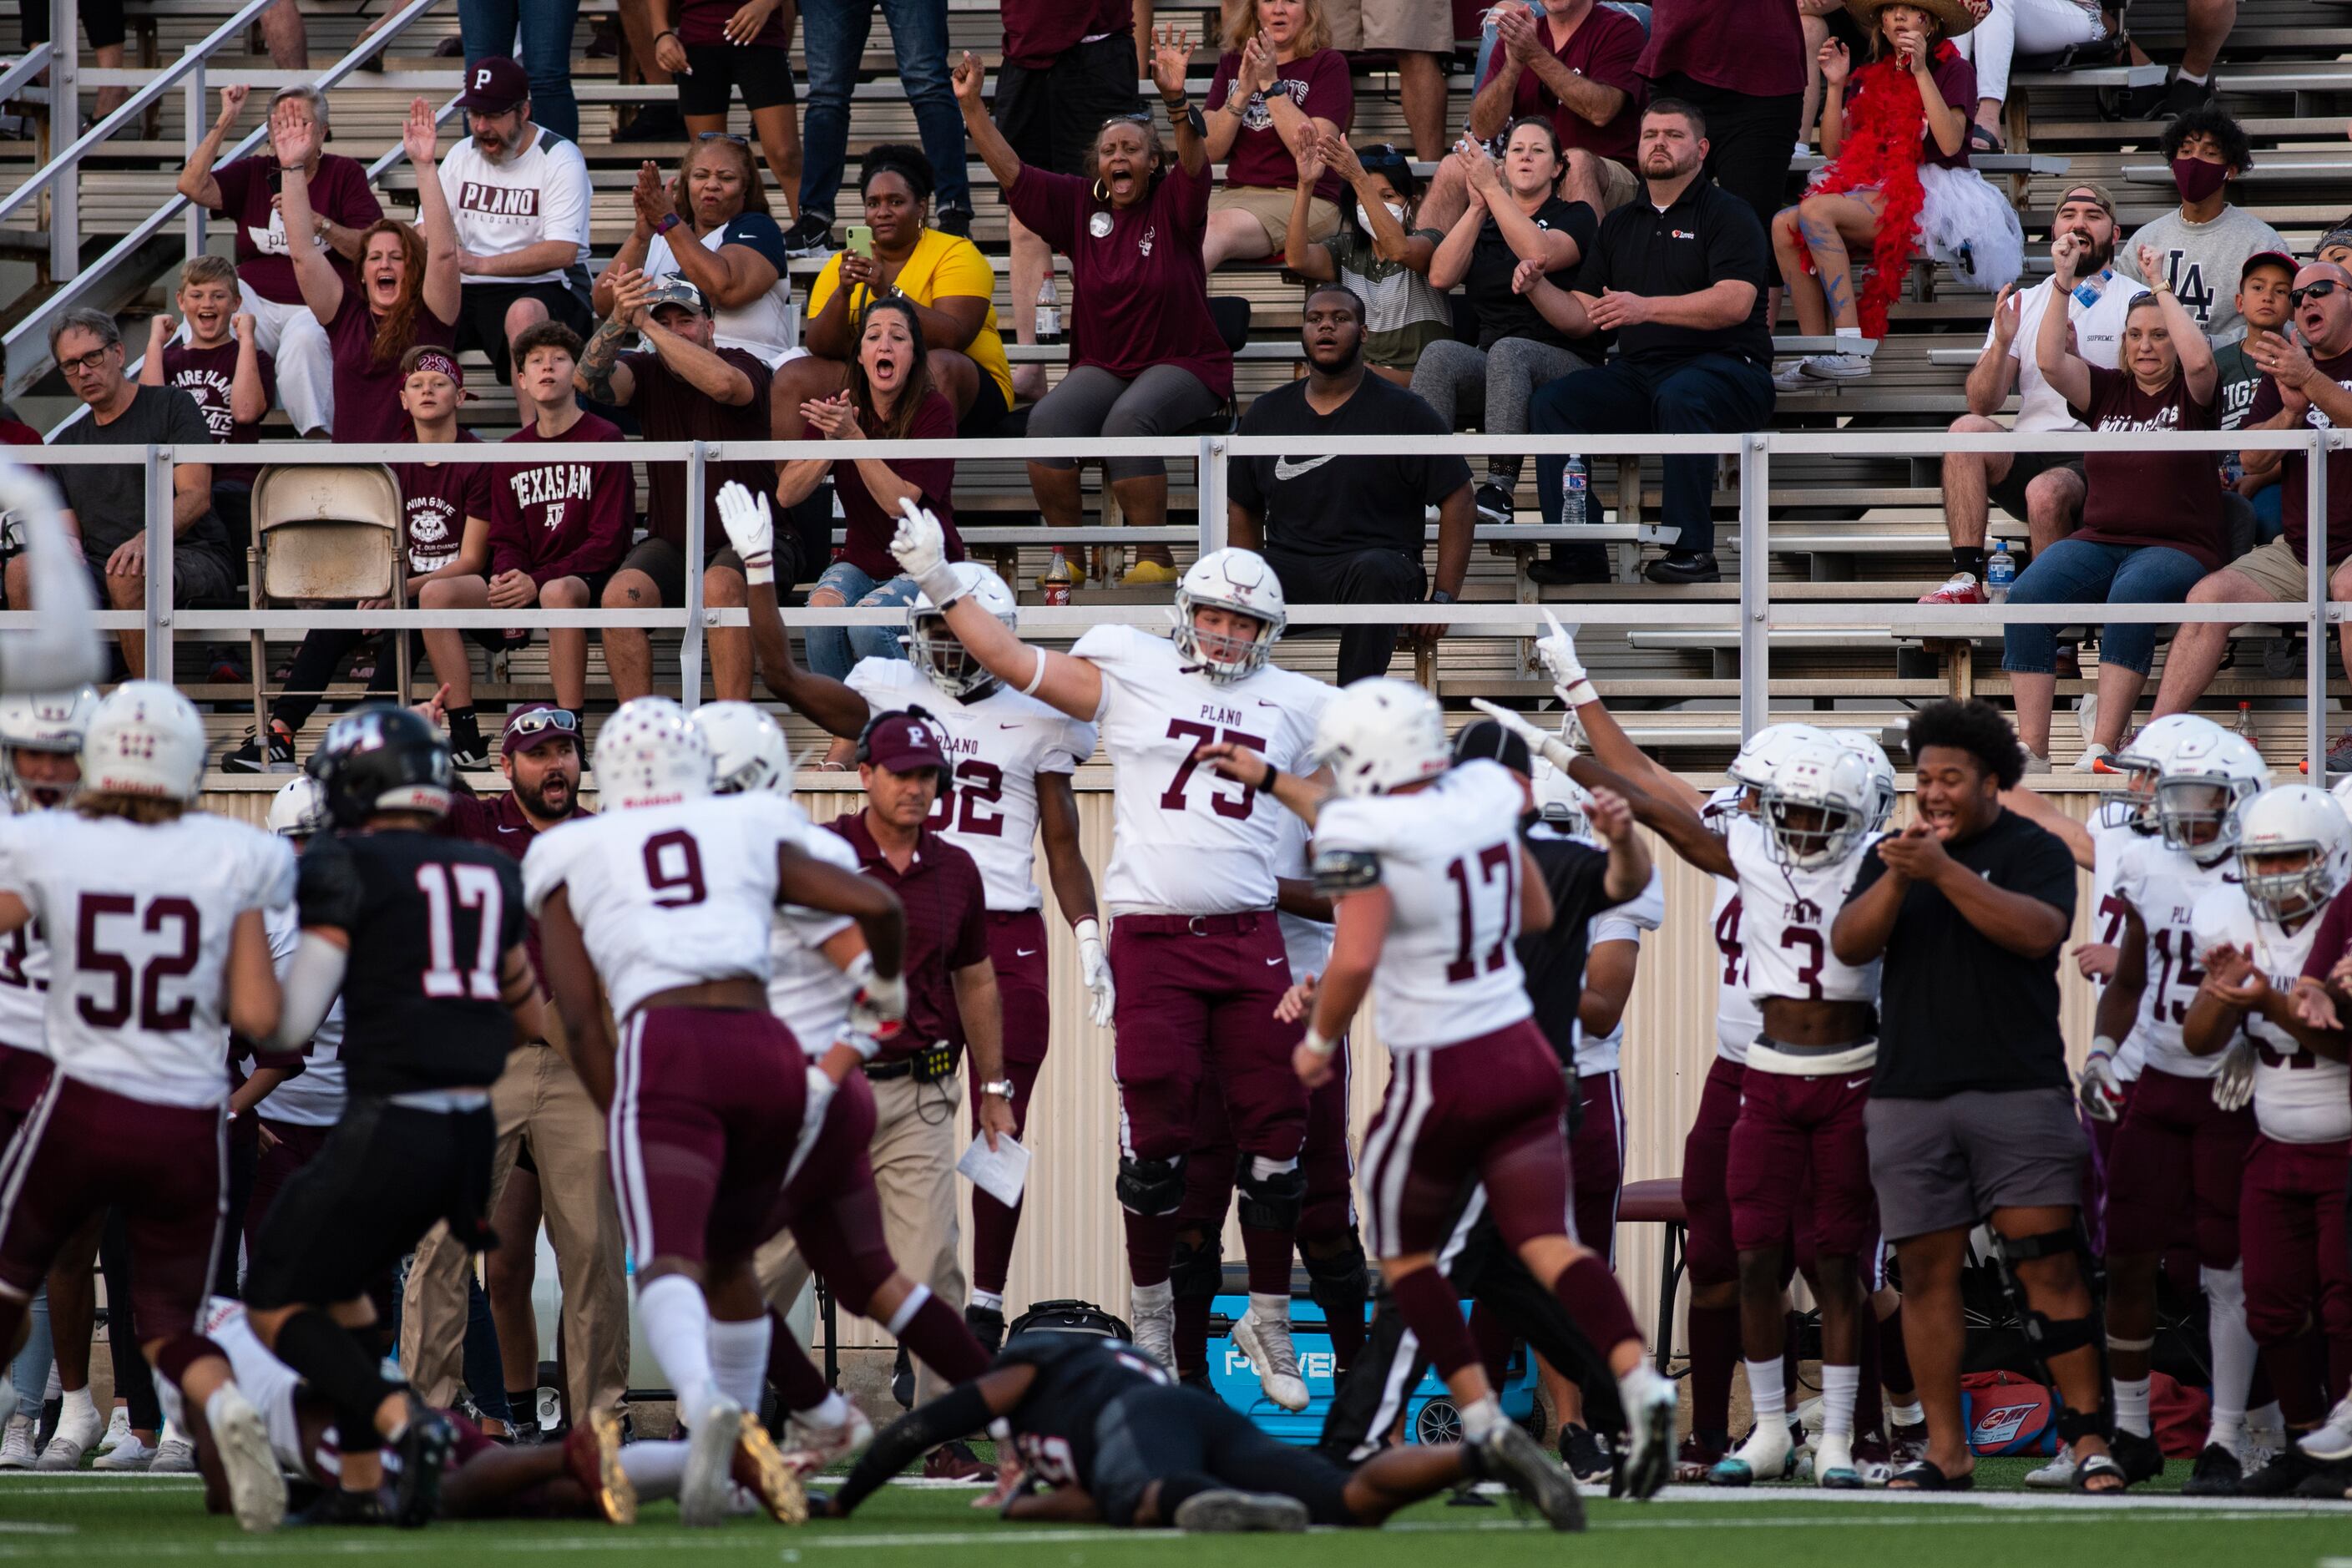 Plano Senior High School players celebrate after recovering a fumble during Lake HighlandÕs...